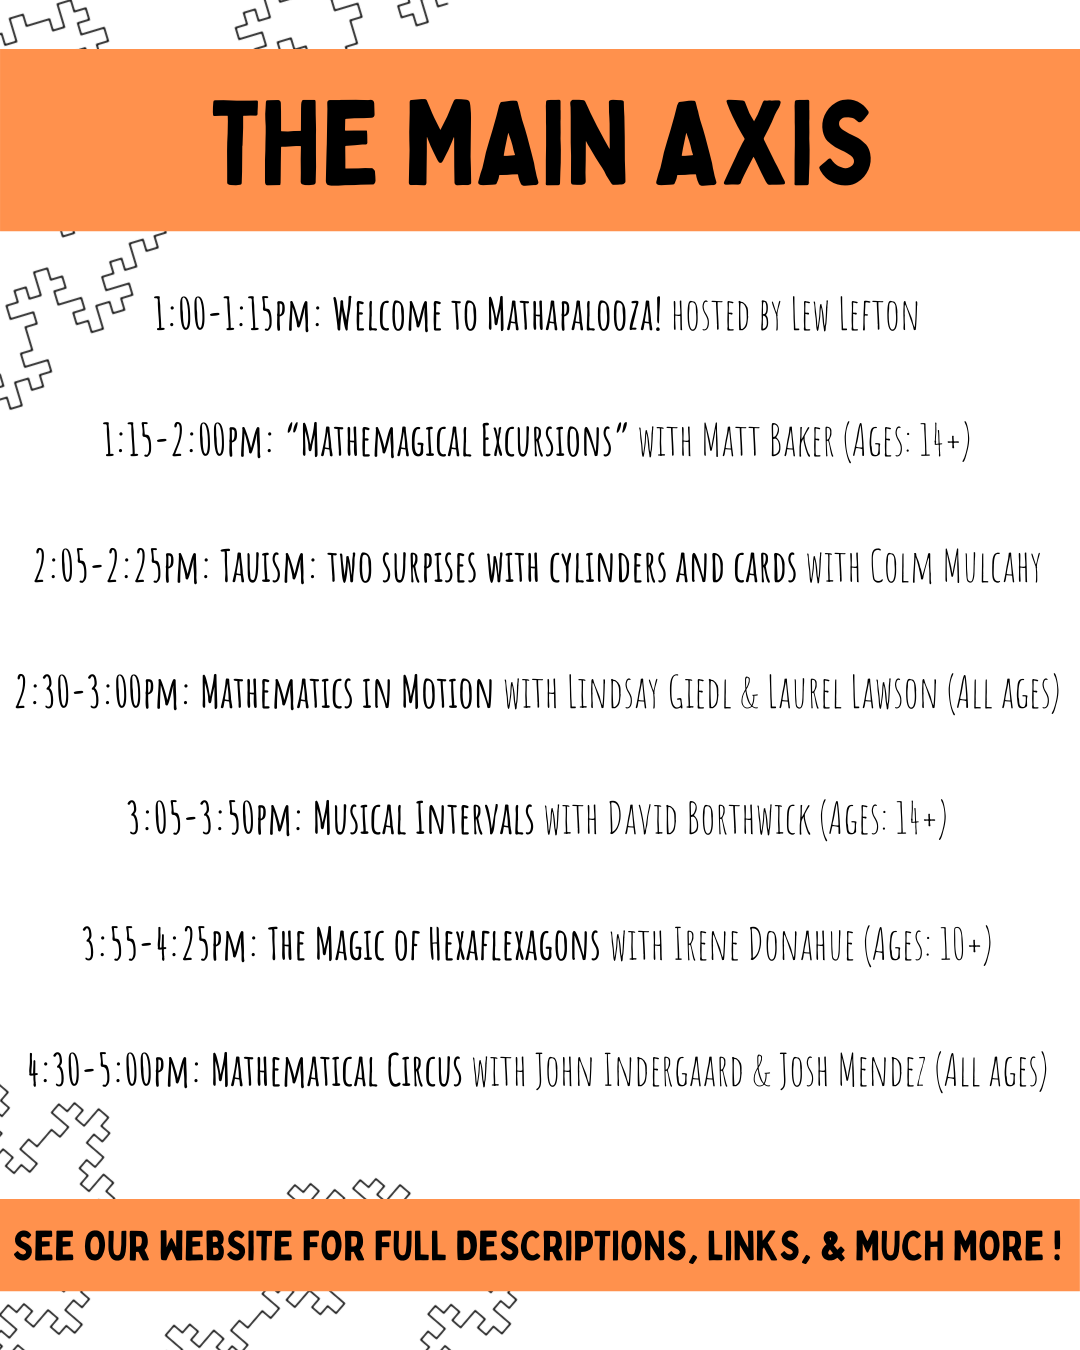 MATHAPALOOZA MAIN SCHEDULE GRAPHIC.png